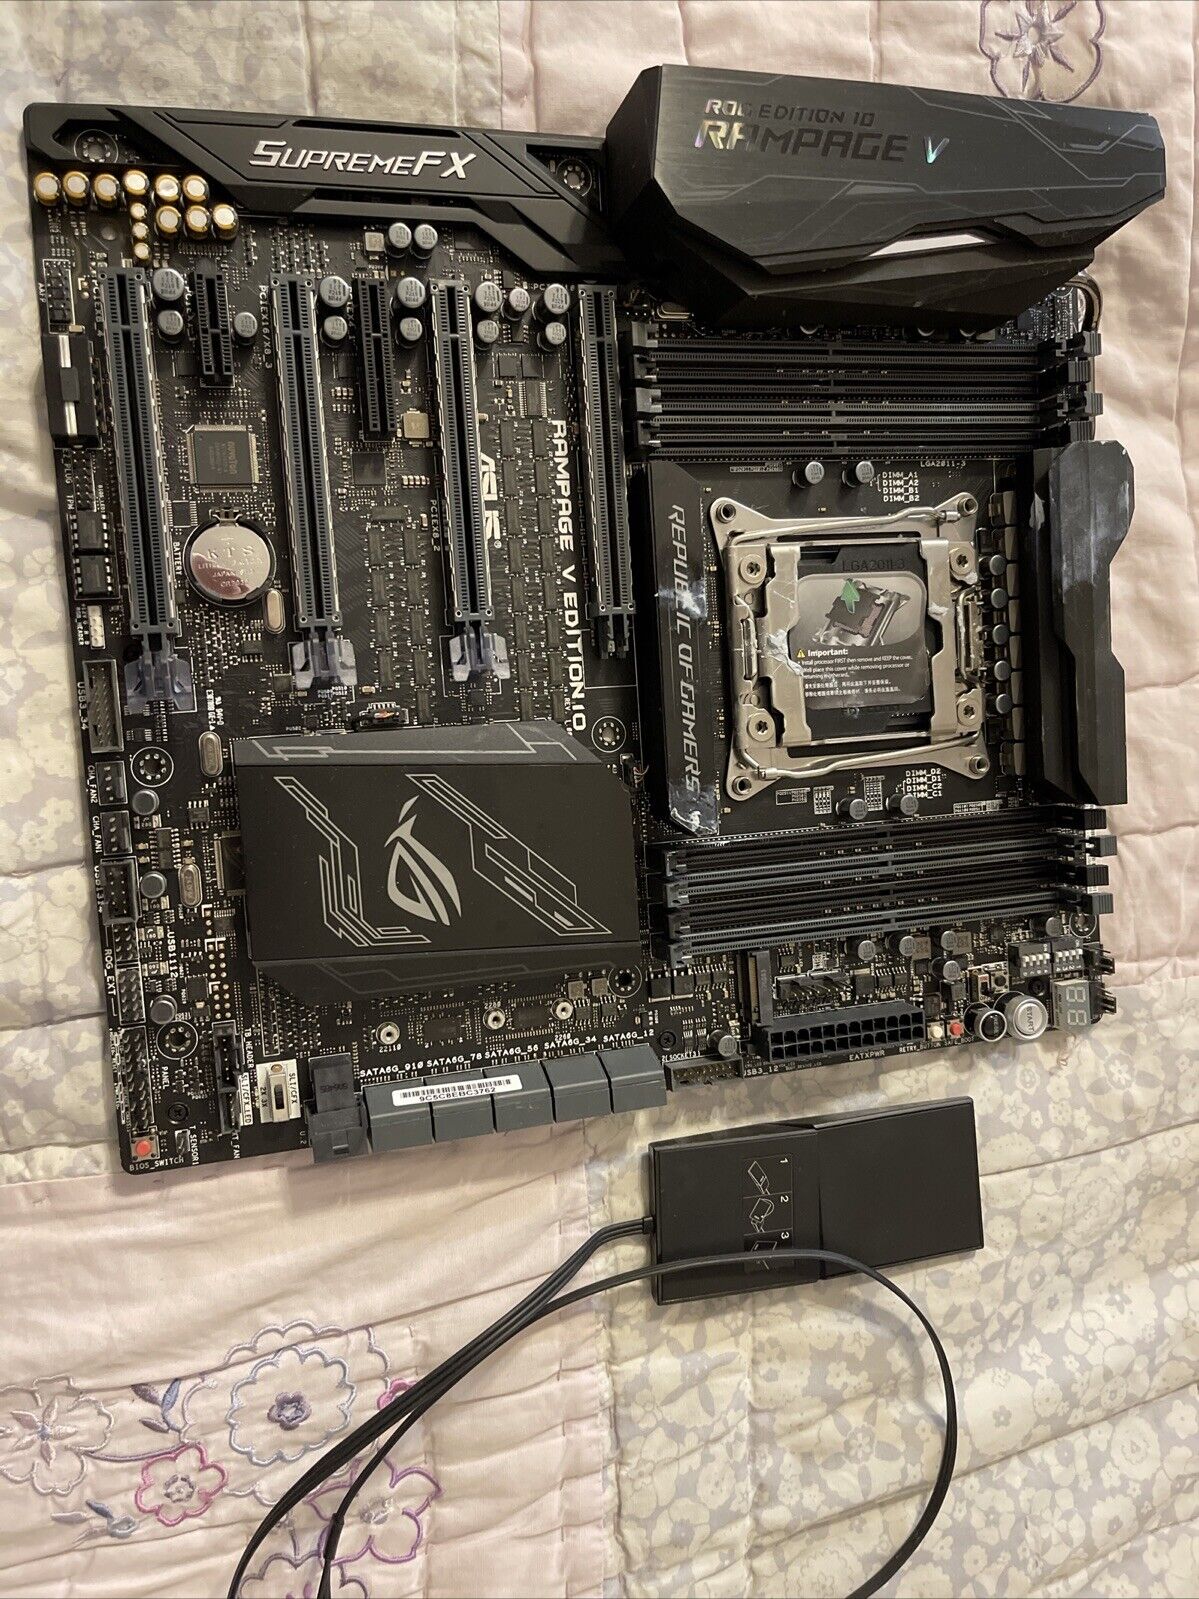 ASUS X99 ROG RAMPAGE V EDITION 10 (Pins Bent Untested With WiFi Antenna)